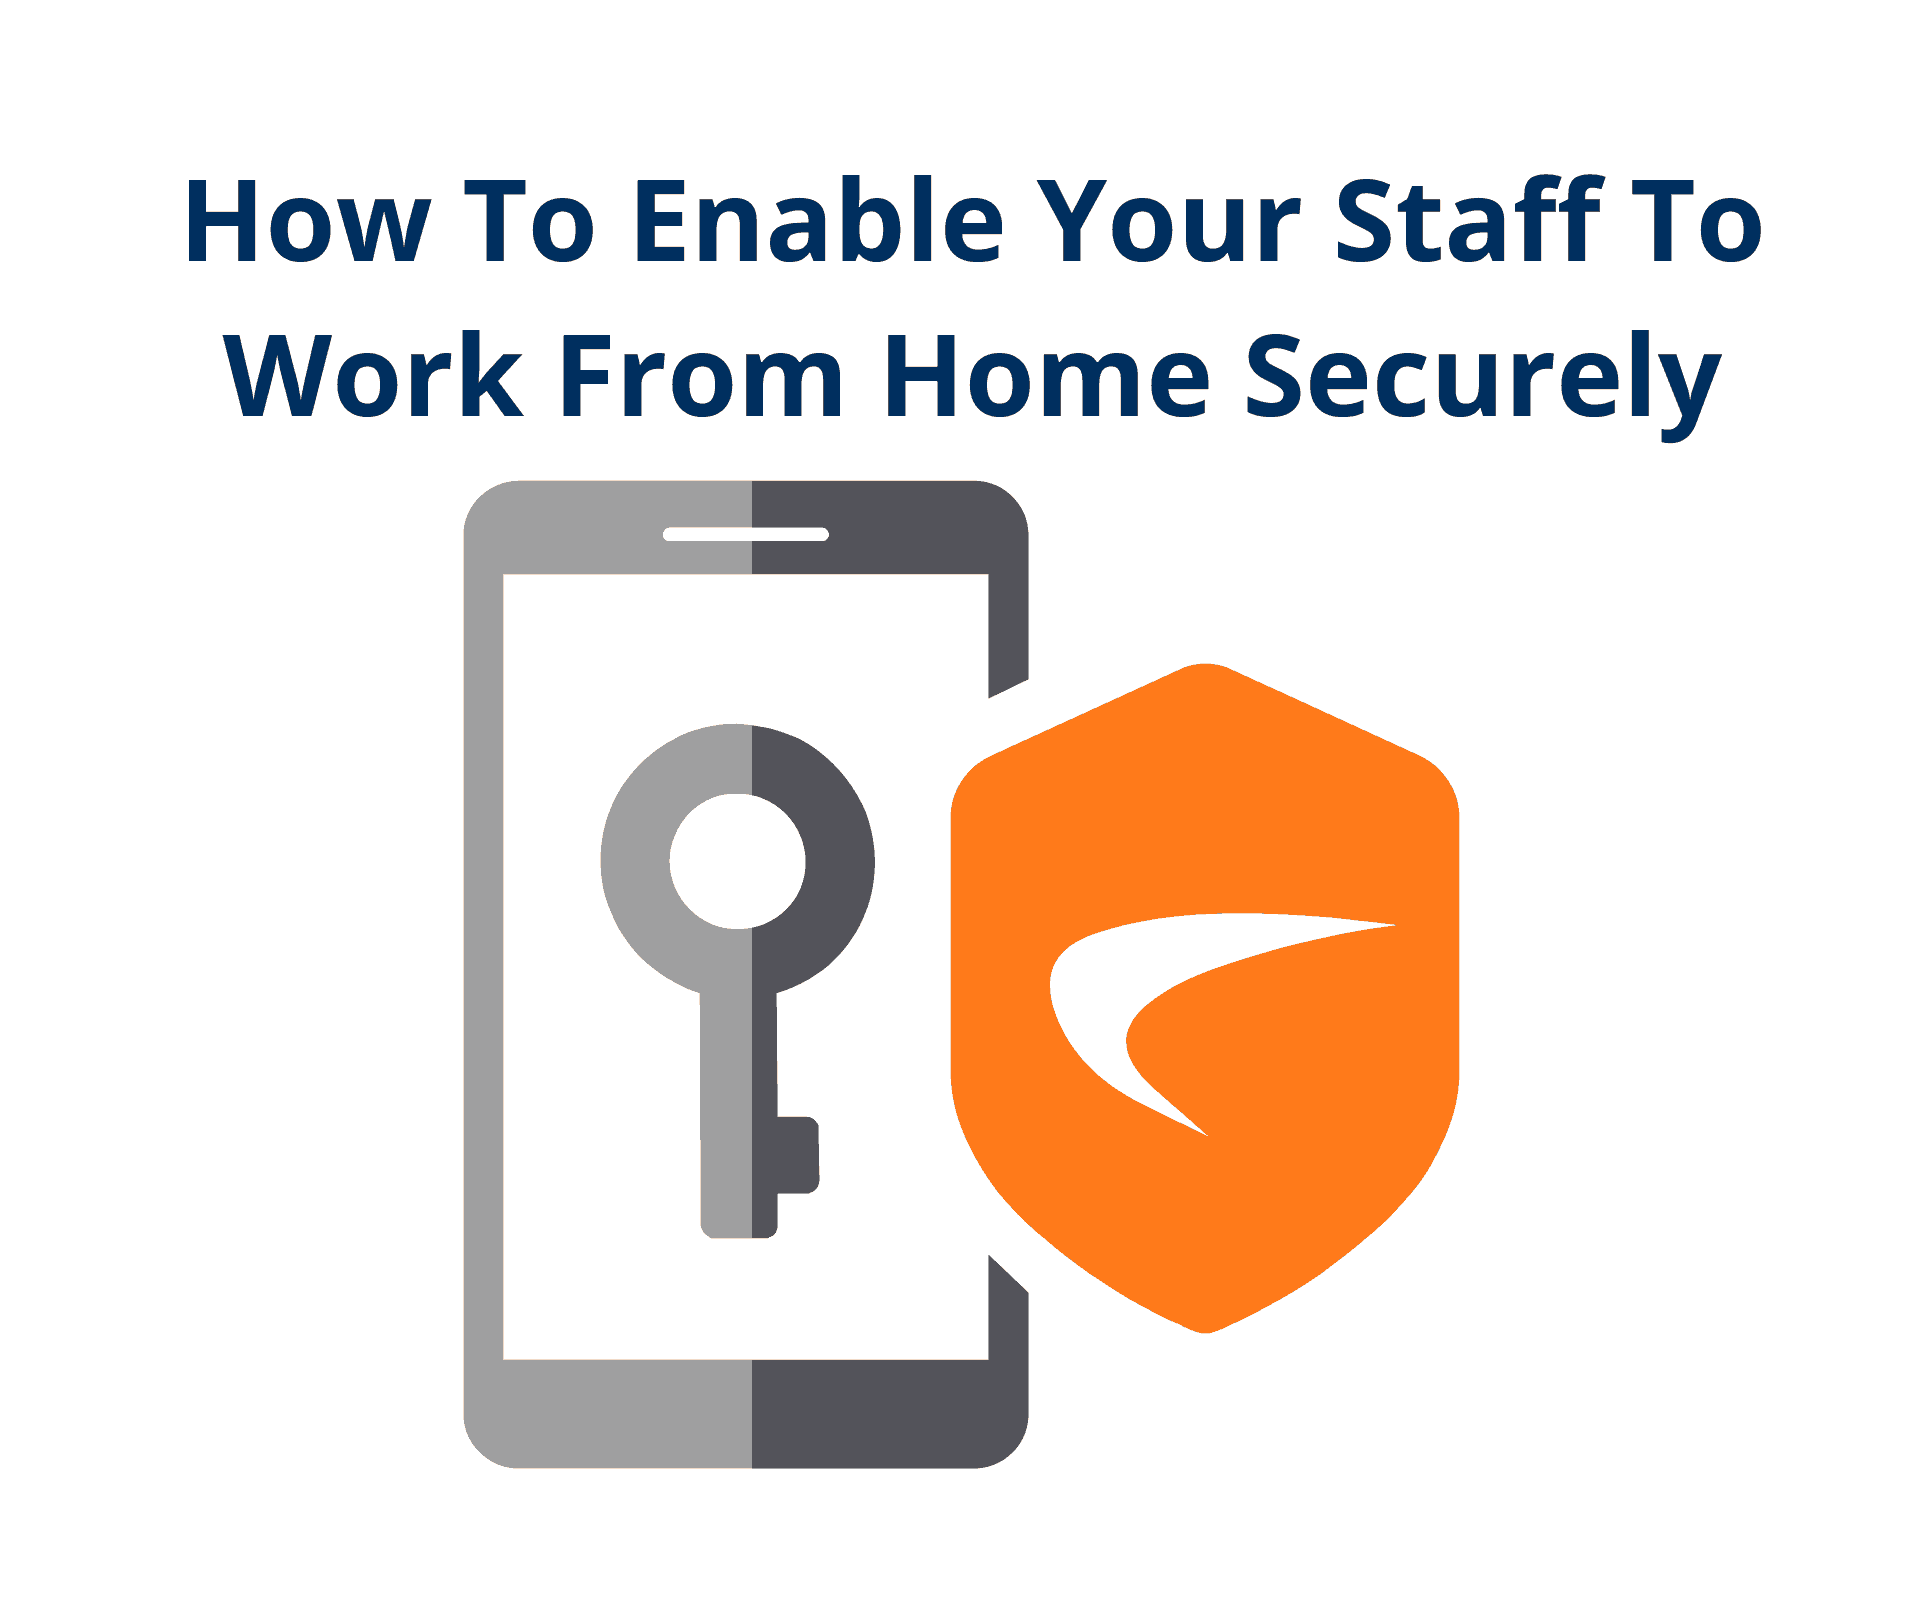 How To Enable Your Staff To Work From Home Securely